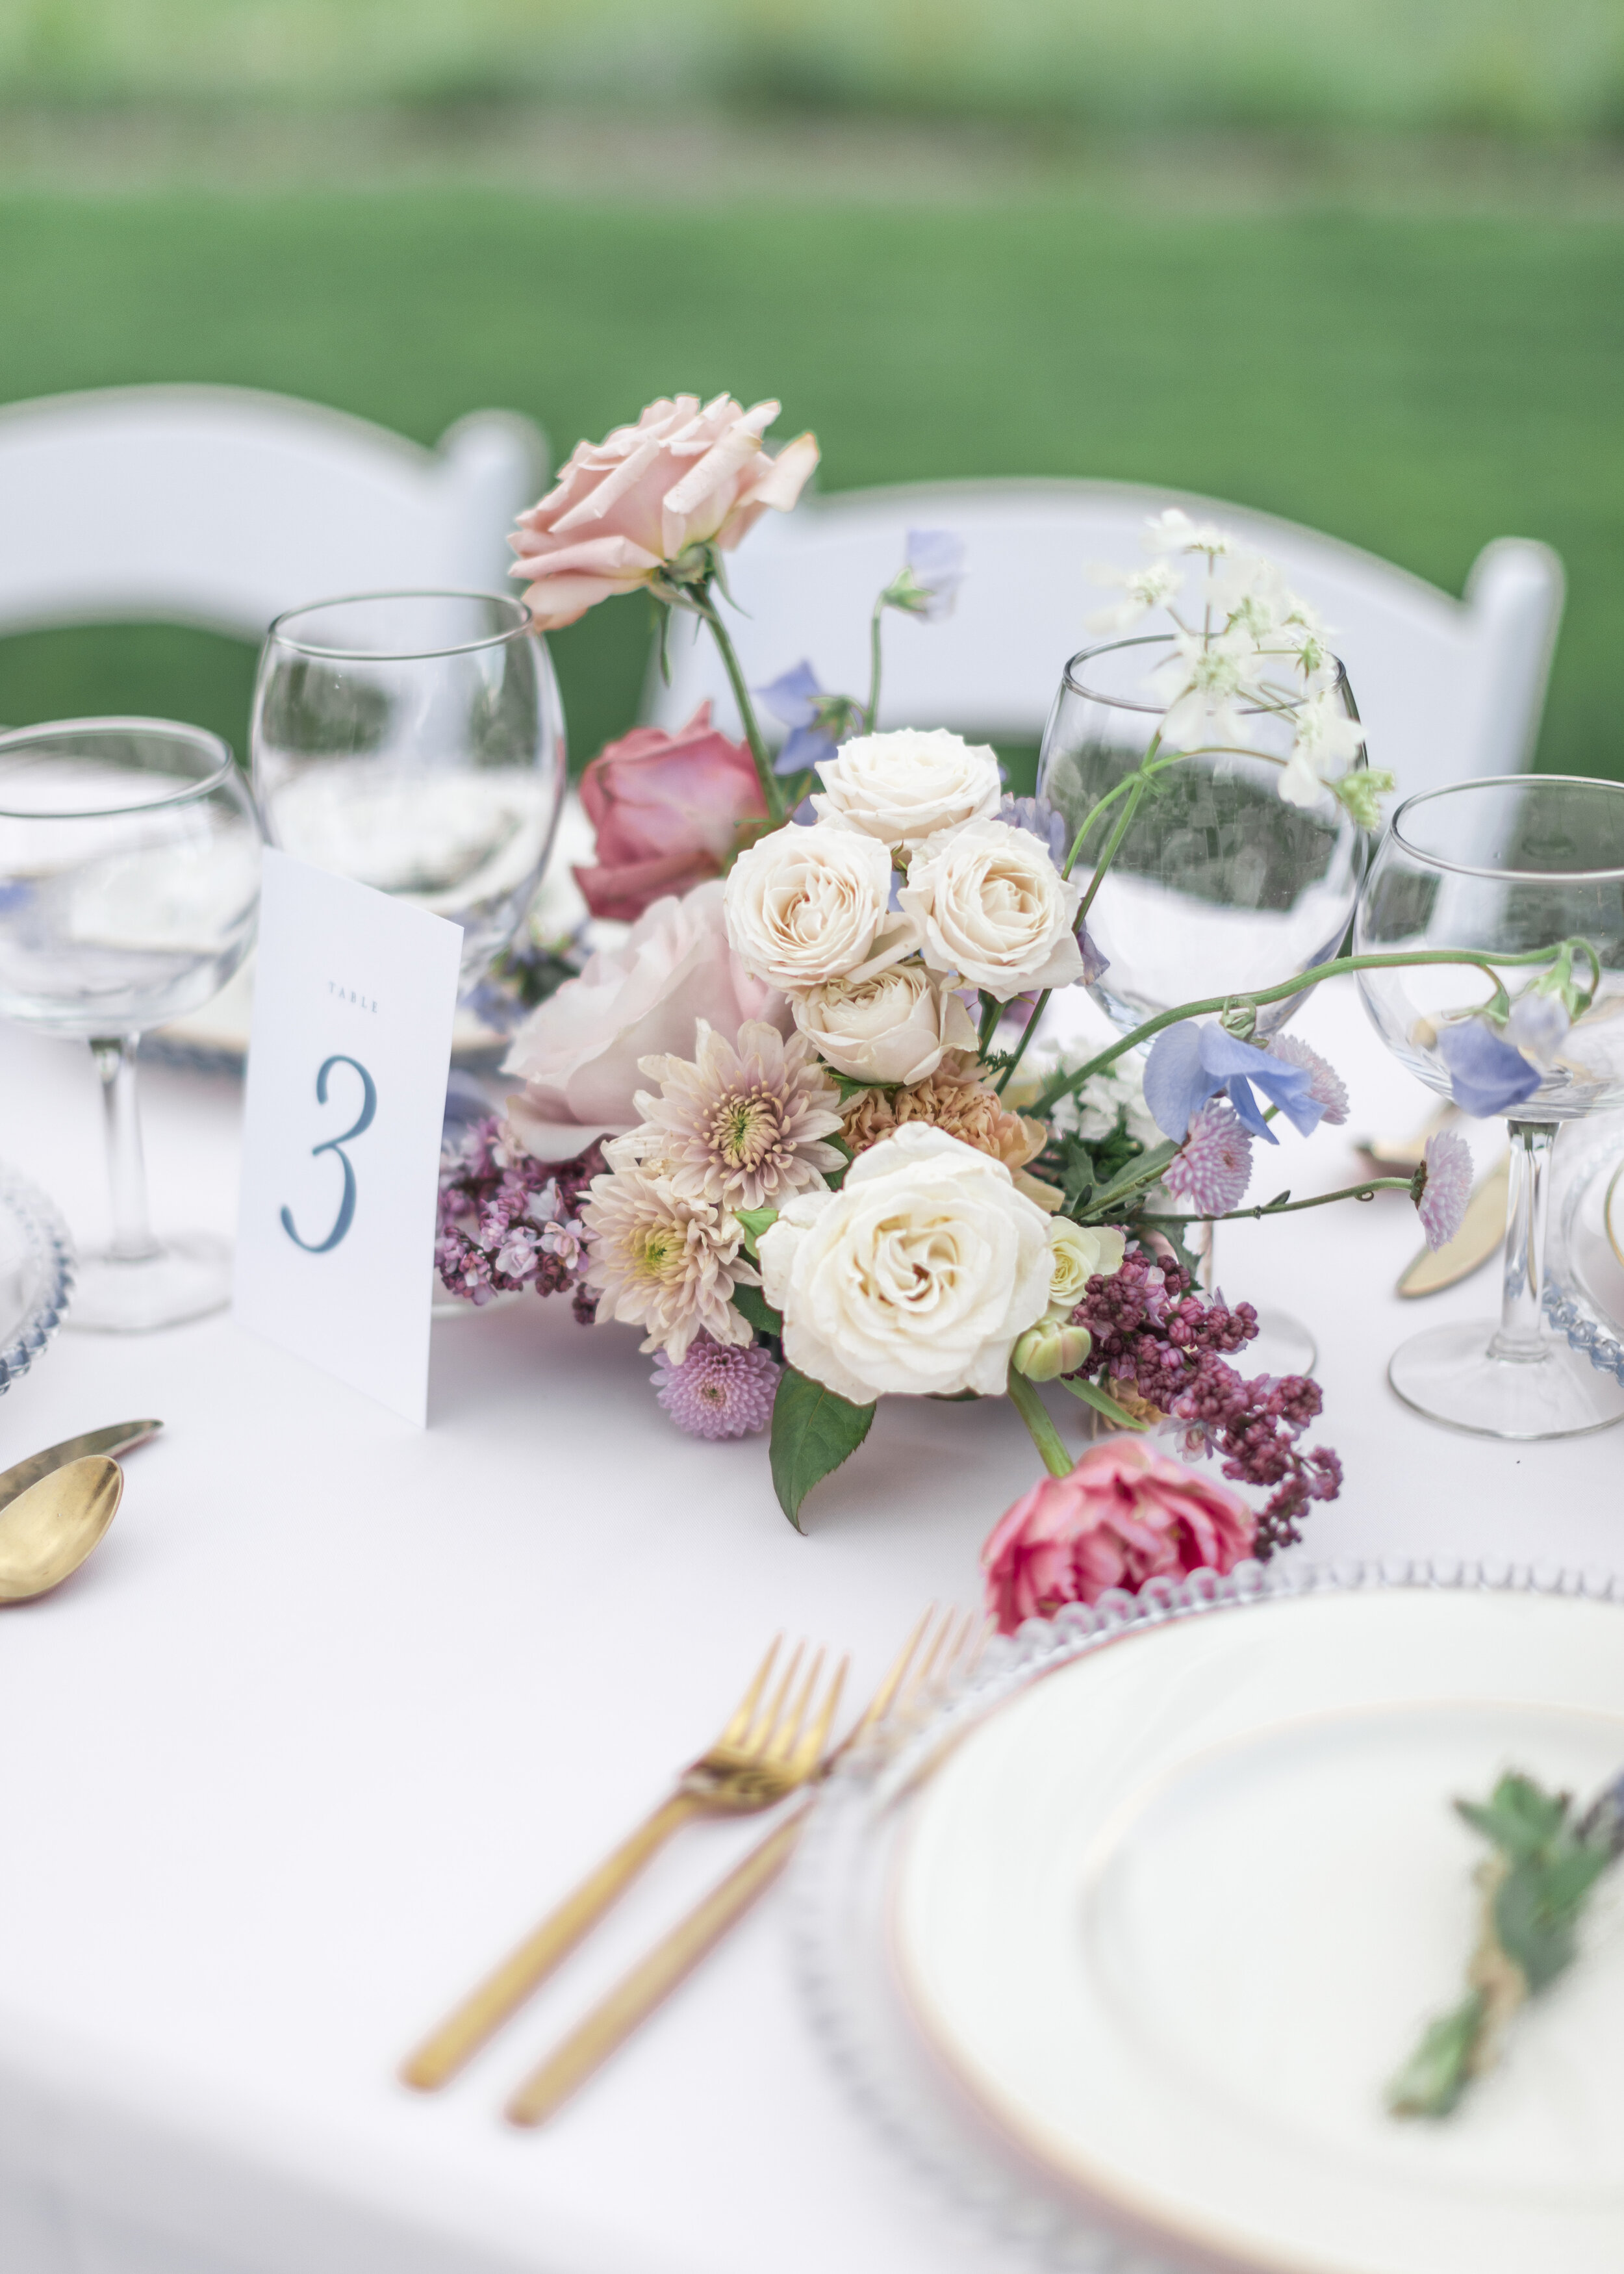  Photo of the wedding luncheon table centerpieces and tableware set up during a wedding photography workshop in Logan, Utah by Clarity Lane Photography. outdoor wedding table set-up hands-on portfolio-wedding builder #claritylanephotography #clarityl